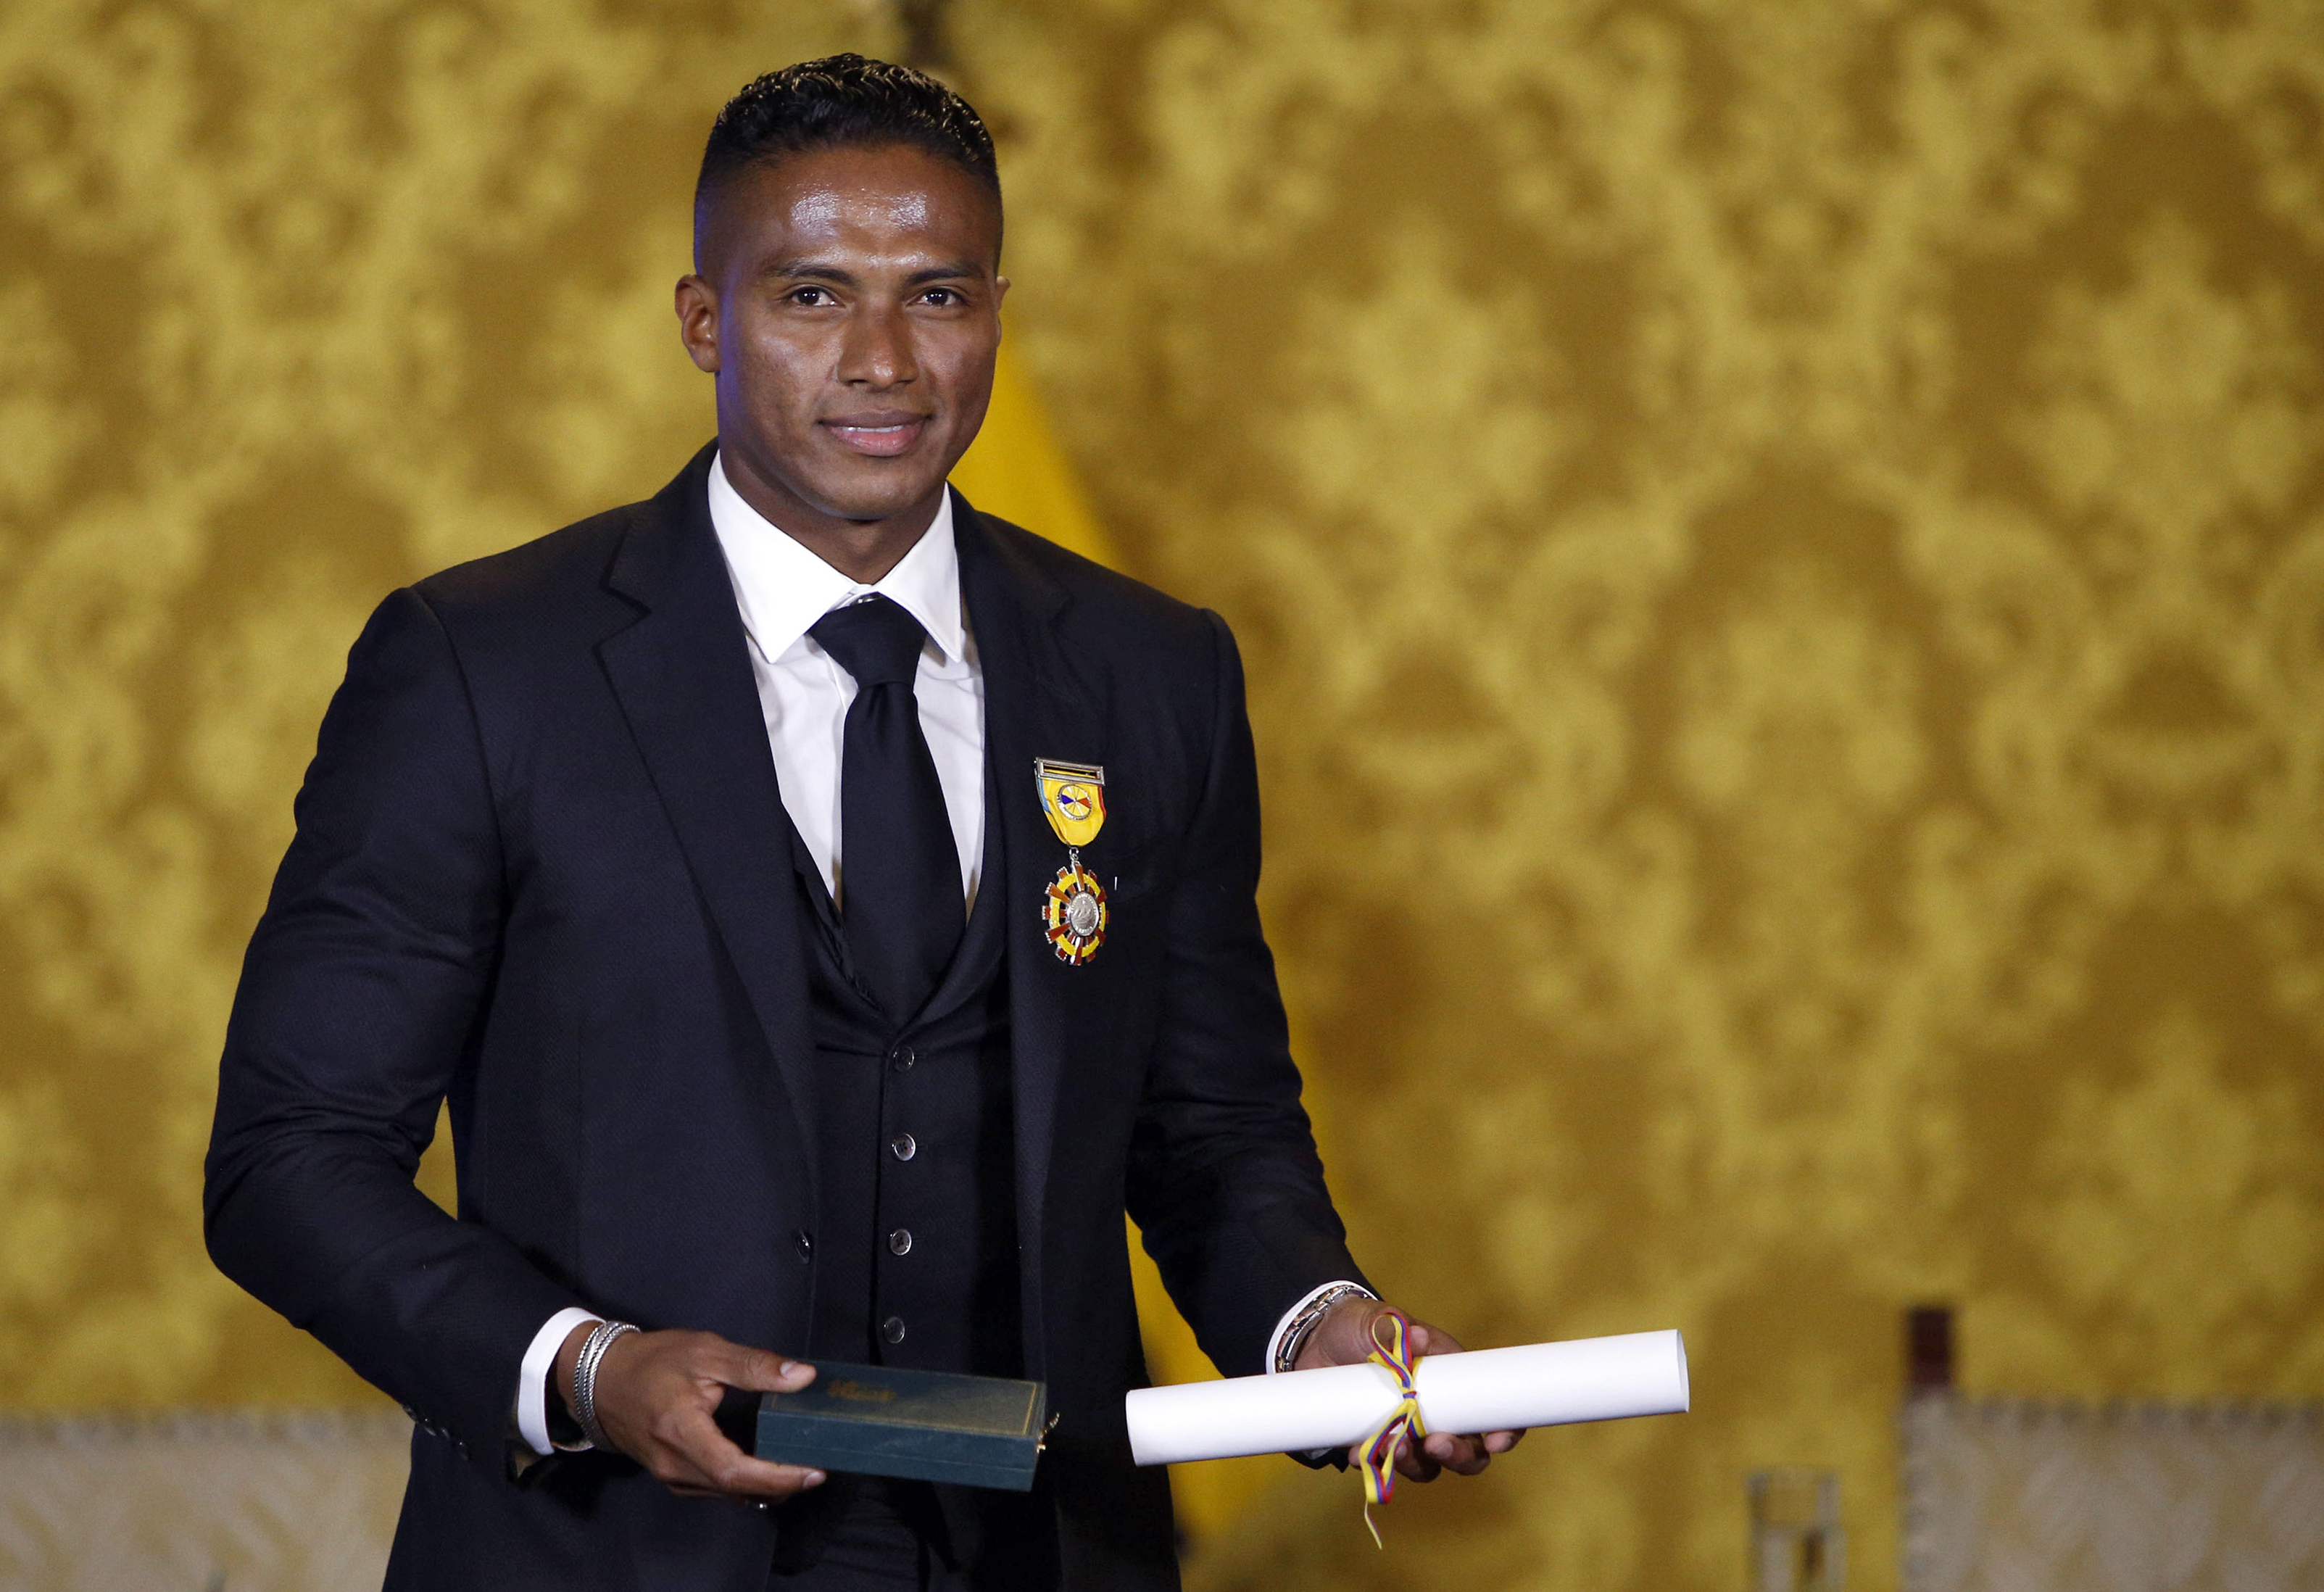 Ex-Manchester United Ecuadorean footballer Luis Antonio Valencia poses after being decorated by Ecuadorean President Lenin Moreno with the National Order of Merit for his professional sport career, at Carondelet Presidential Palace in Quito on May 14, 2019. (Photo by Cristina VEGA / AFP)        (Photo credit should read CRISTINA VEGA/AFP/Getty Images)